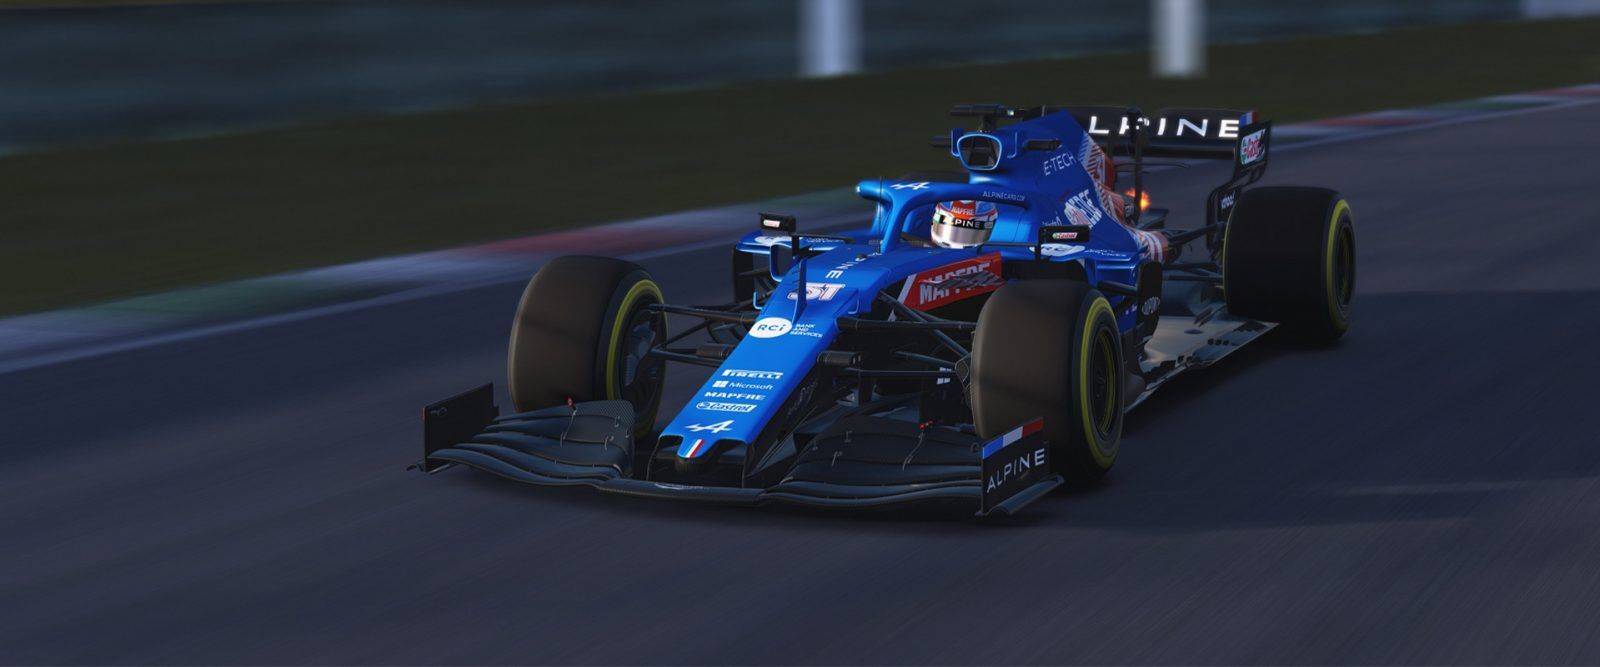 Tracks that are missing in F1 2020 and should be in F1 2021